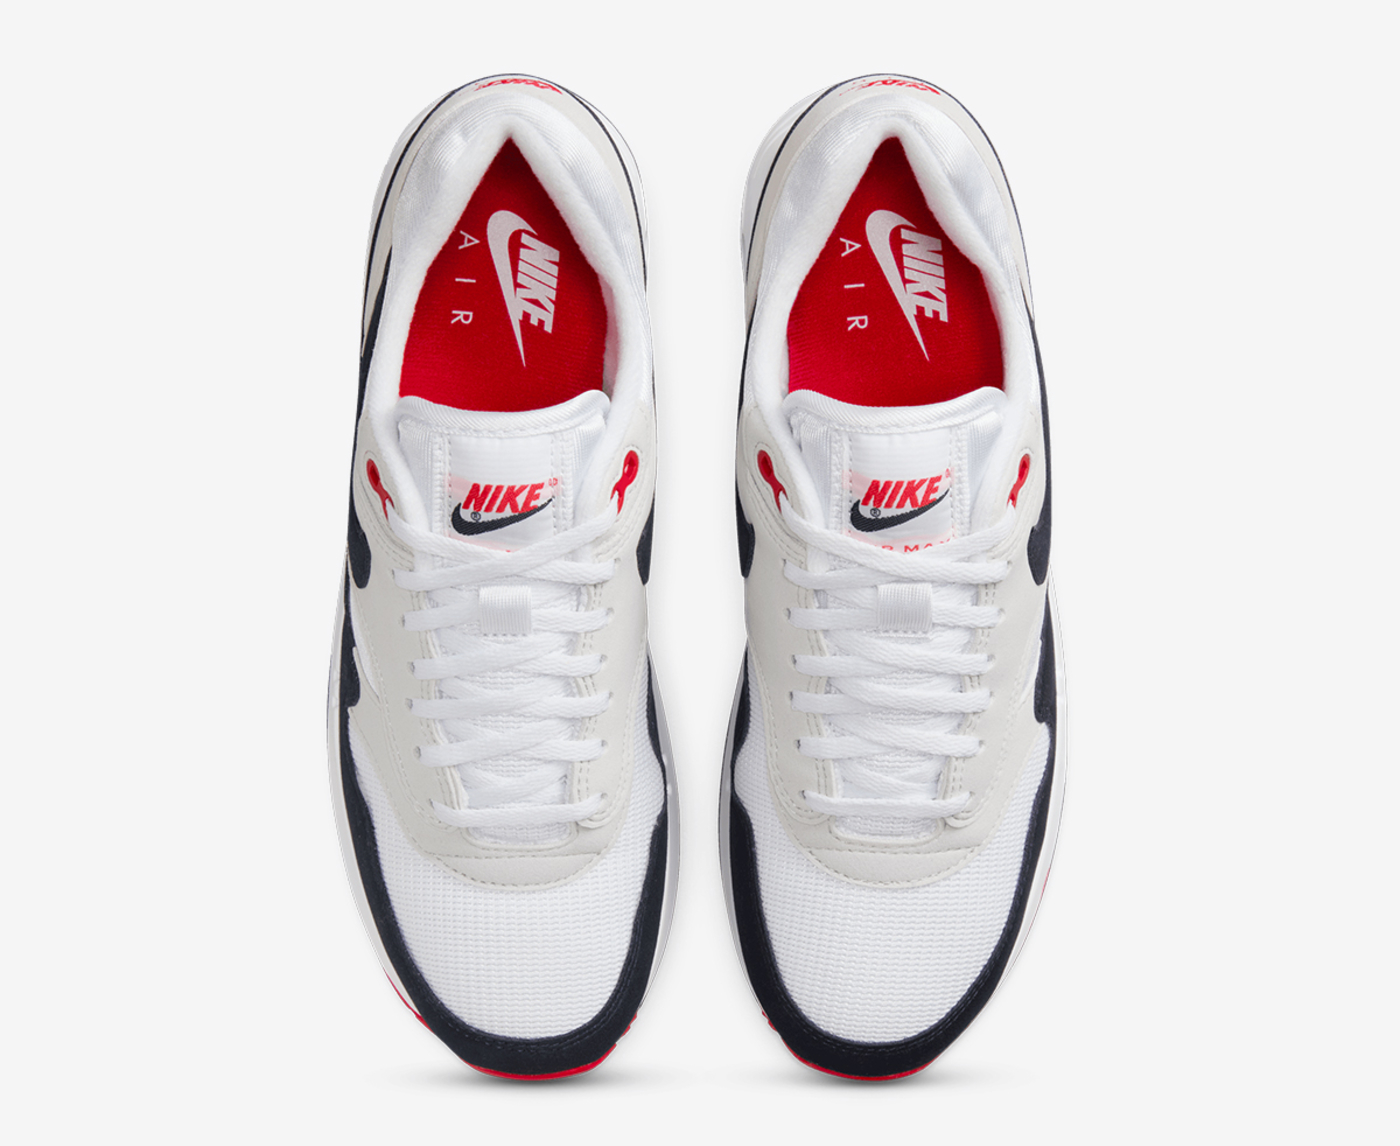 AIR MAX 1 LV8 OBSIDIAN – PRIVATE SNEAKERS